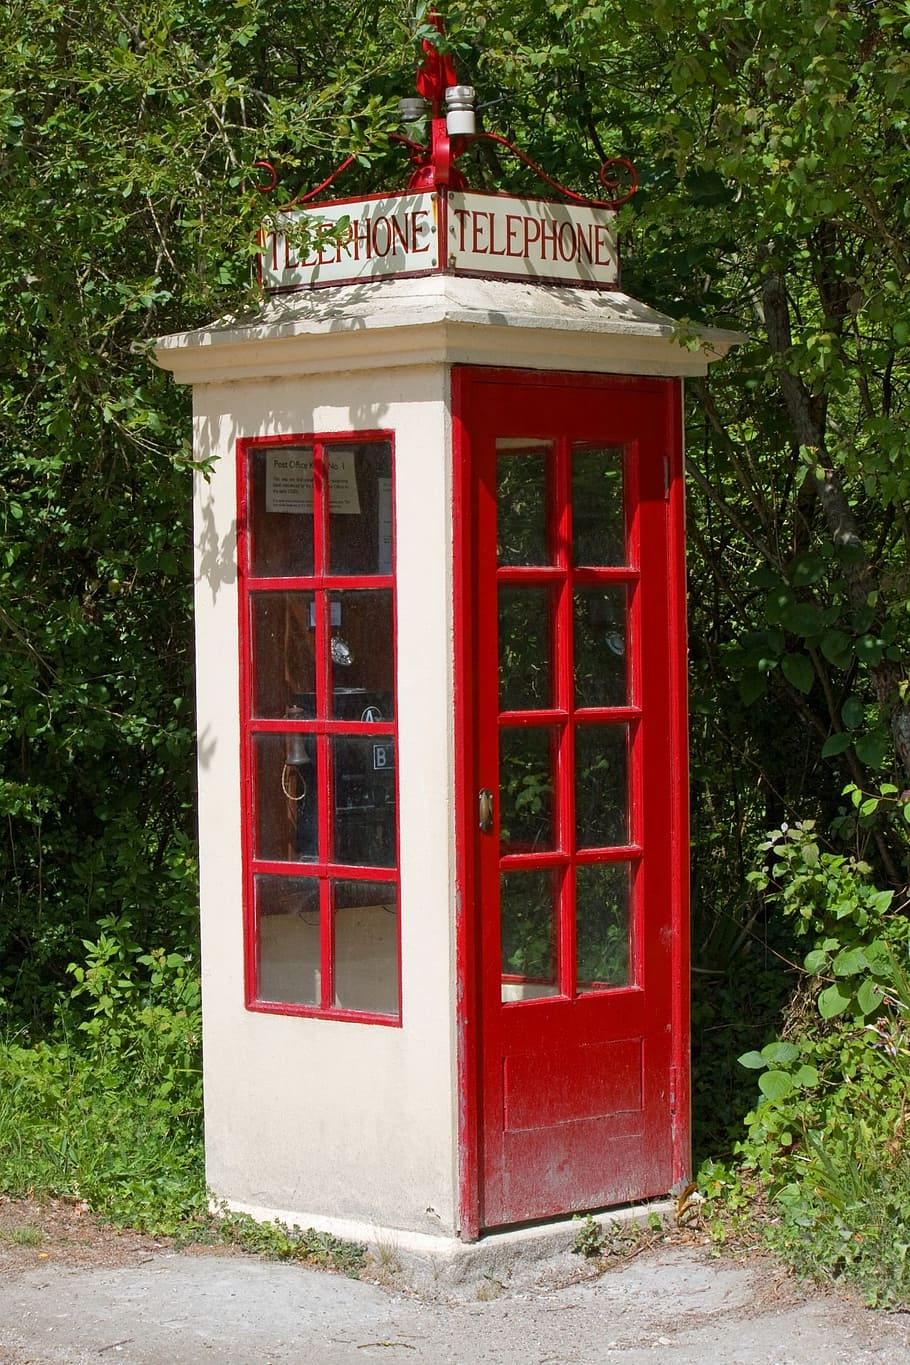 telephone box, vintage, old, english, british, phone, faded, worn, old fashioned, red